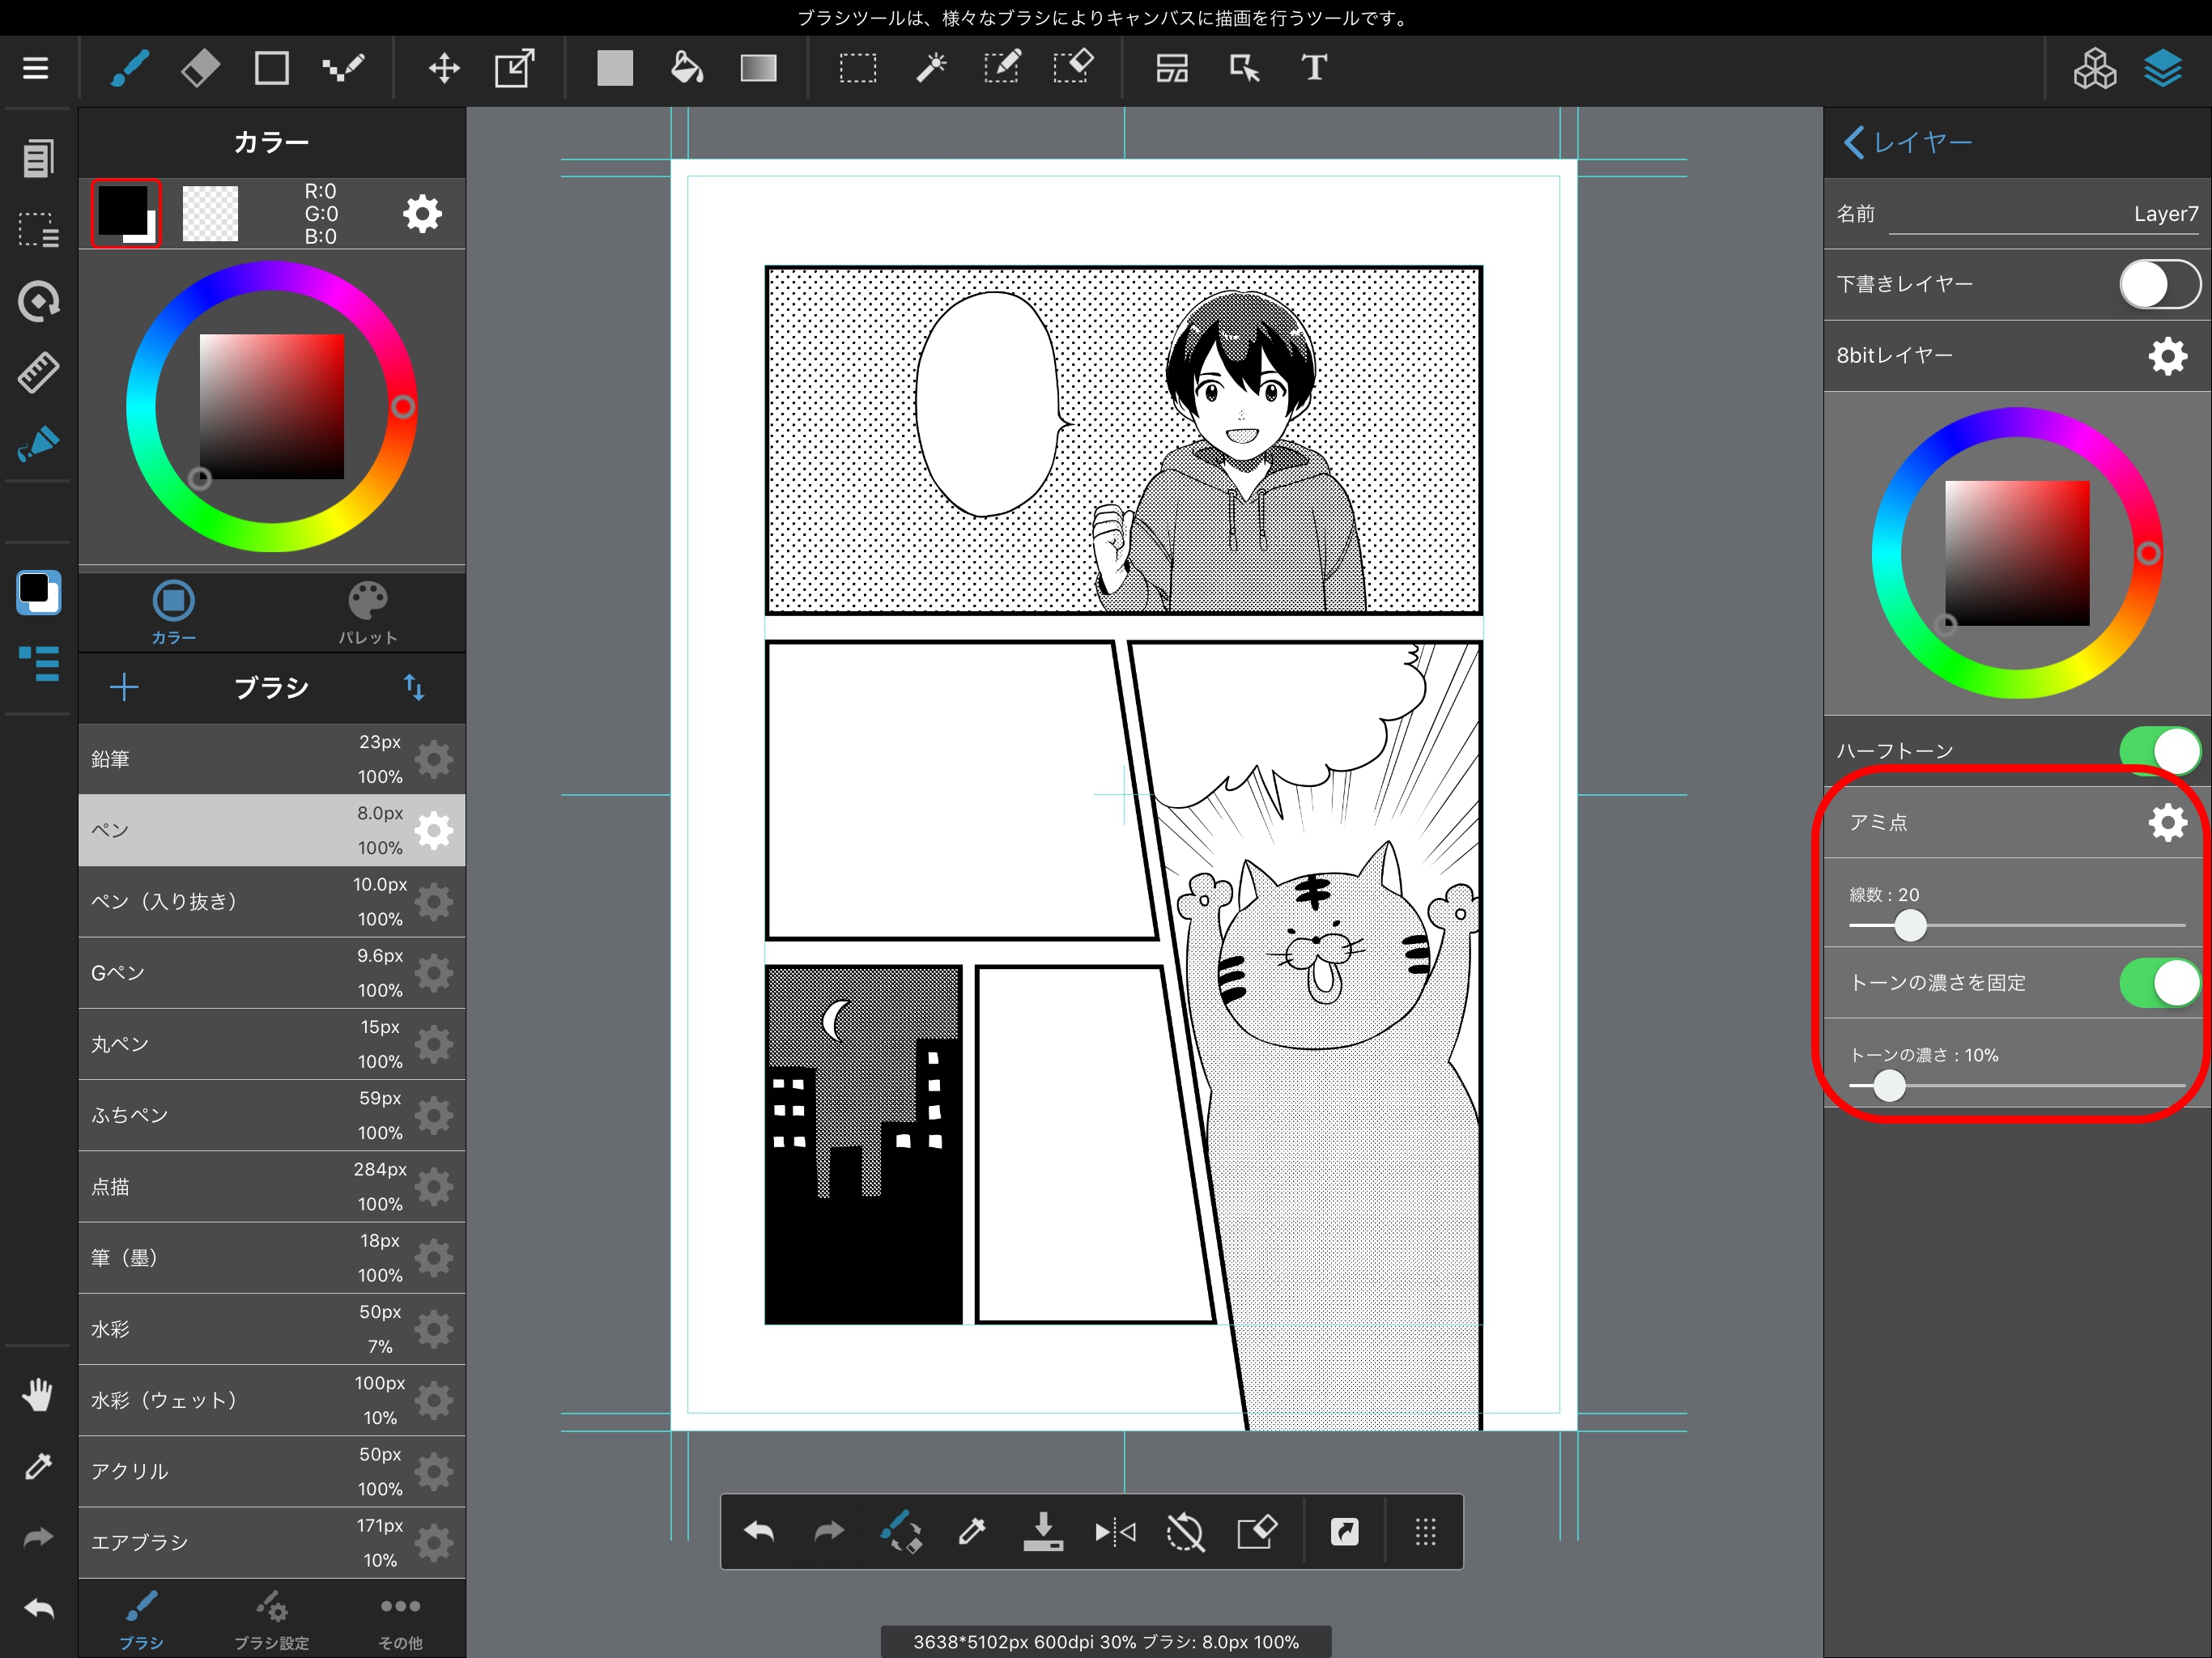 The screen while changing the screentone settings